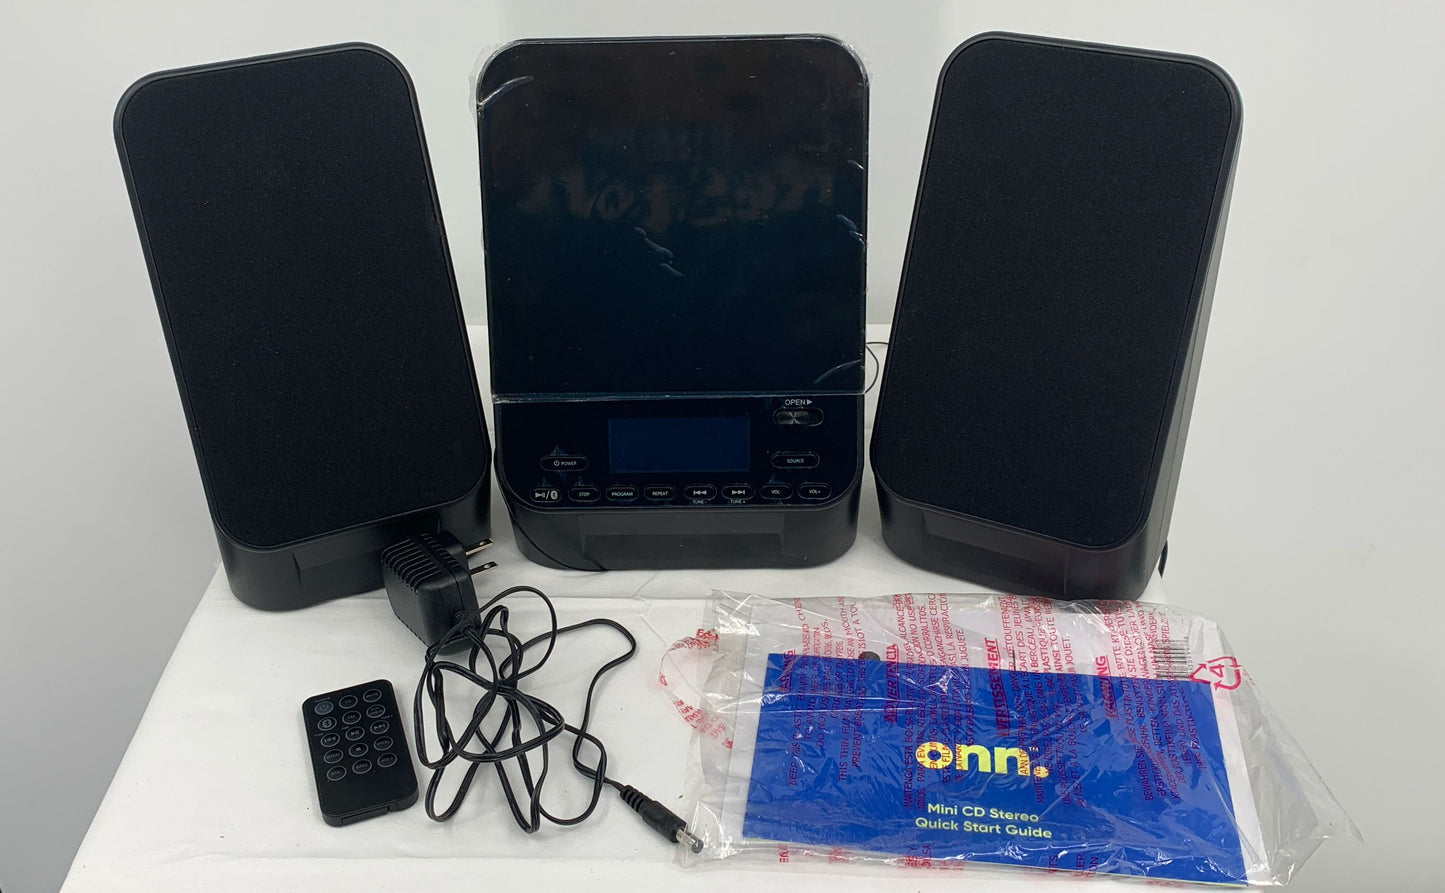 Onn Groove Cd Mini Stereo System With Bluetooth Wireless Technology With Remote